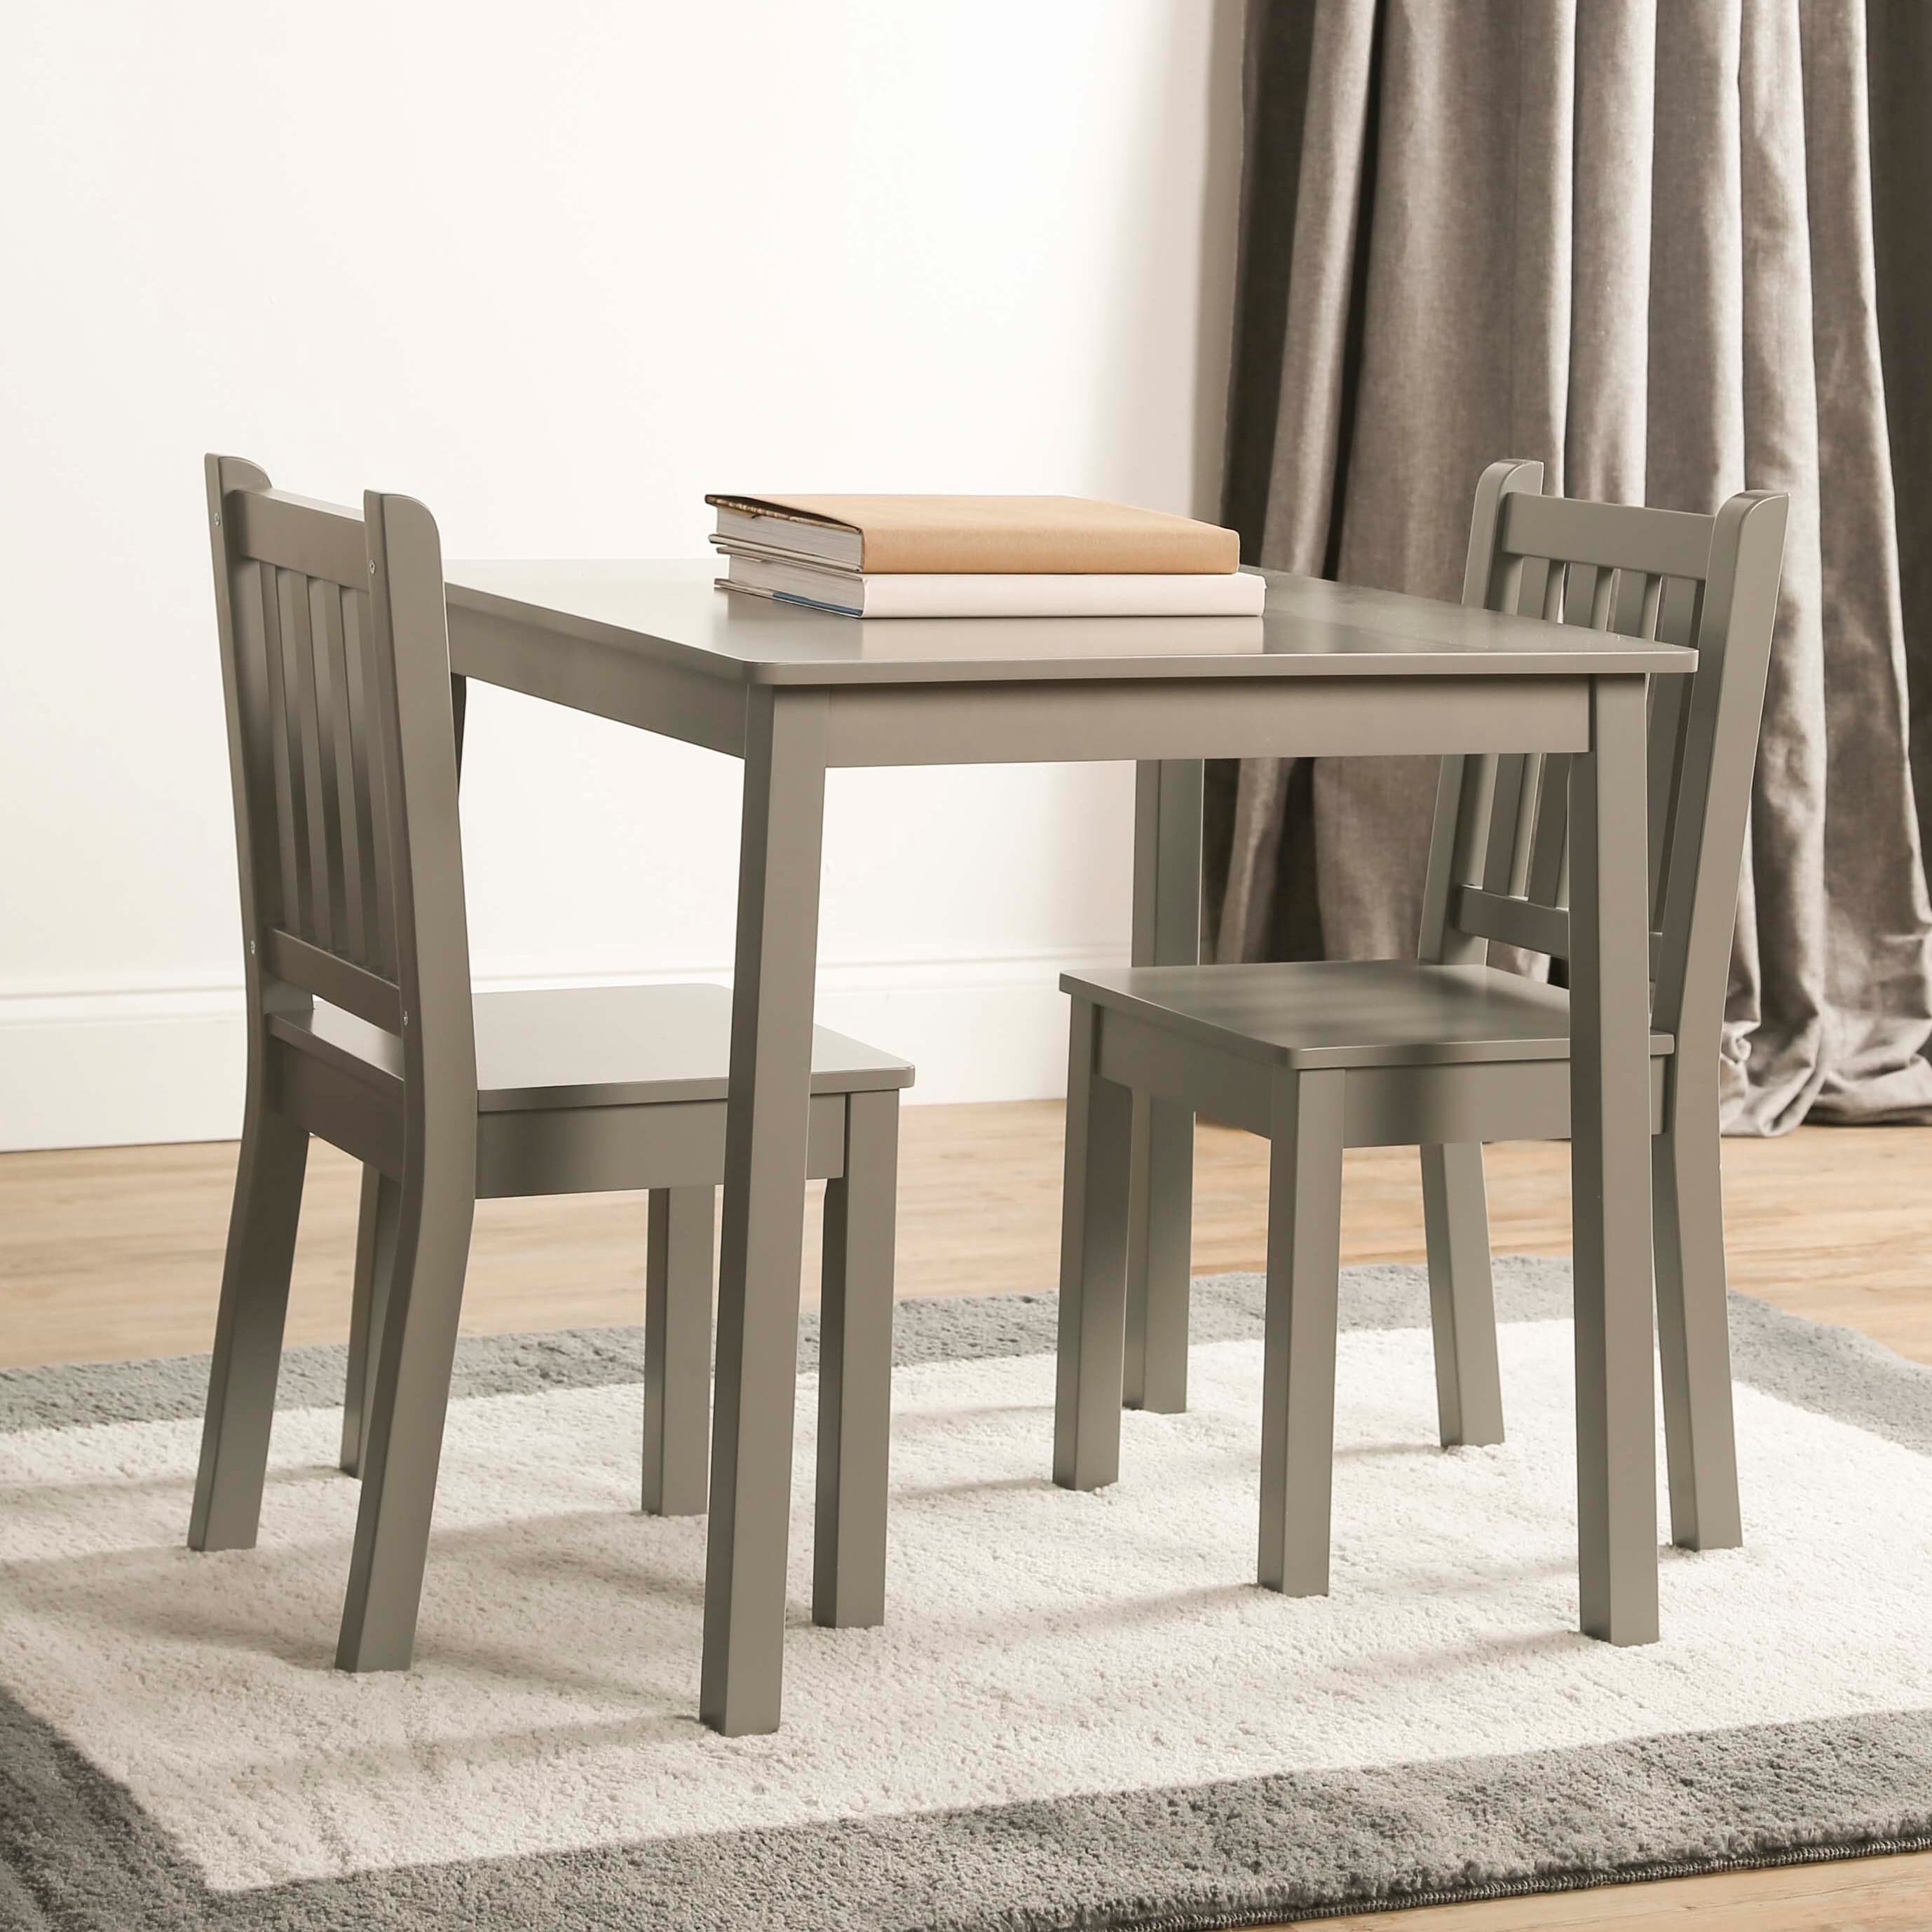 kids table and chairs grey